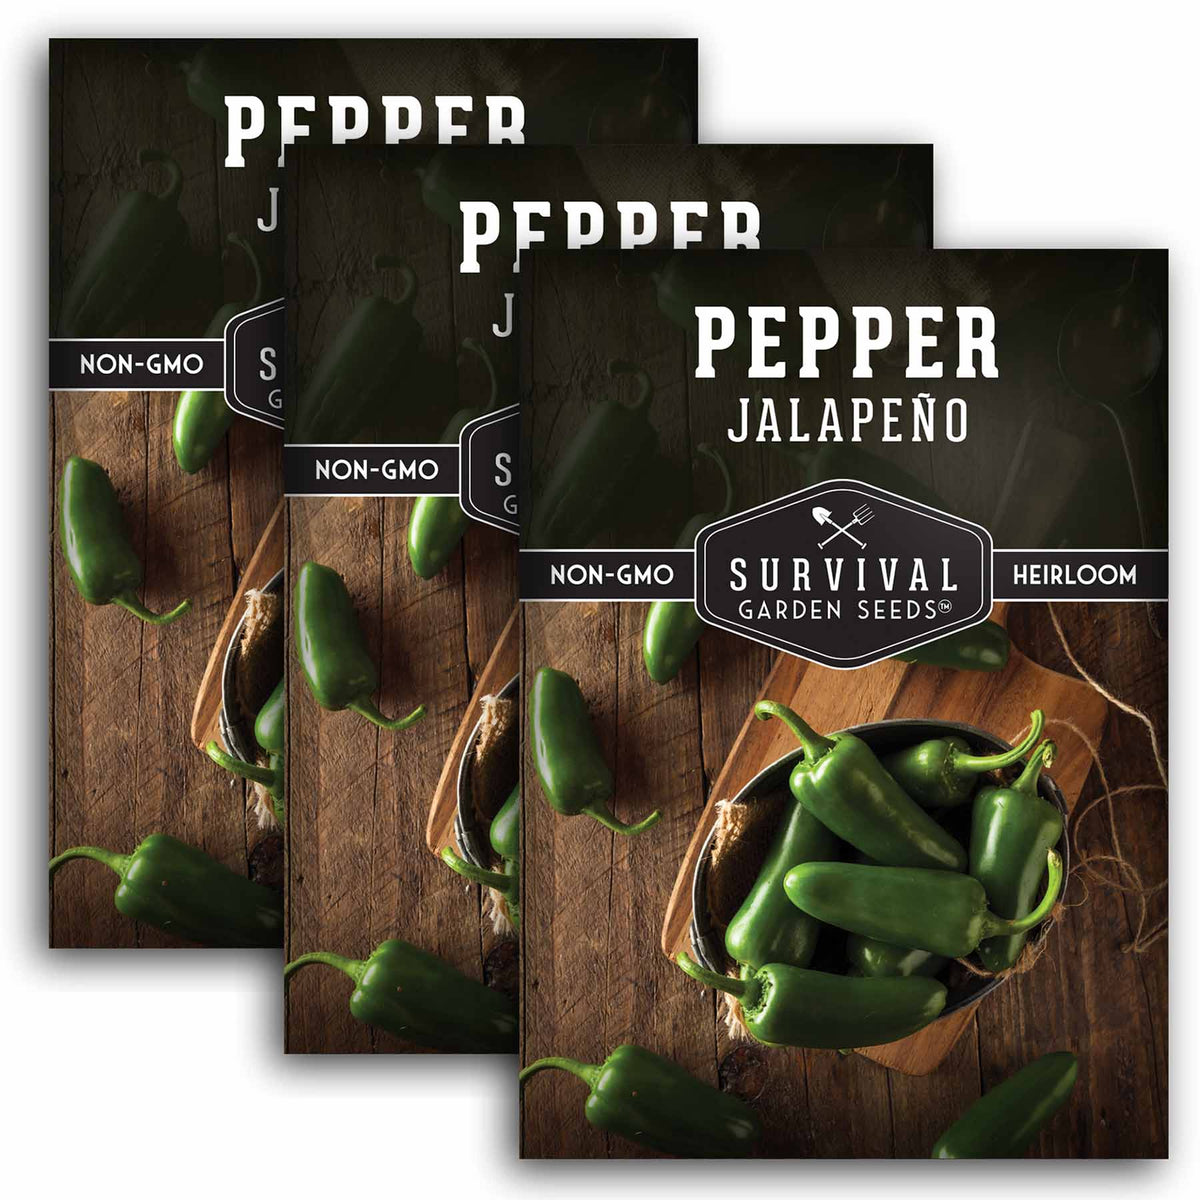 3 packets of Jalapeno Pepper seeds